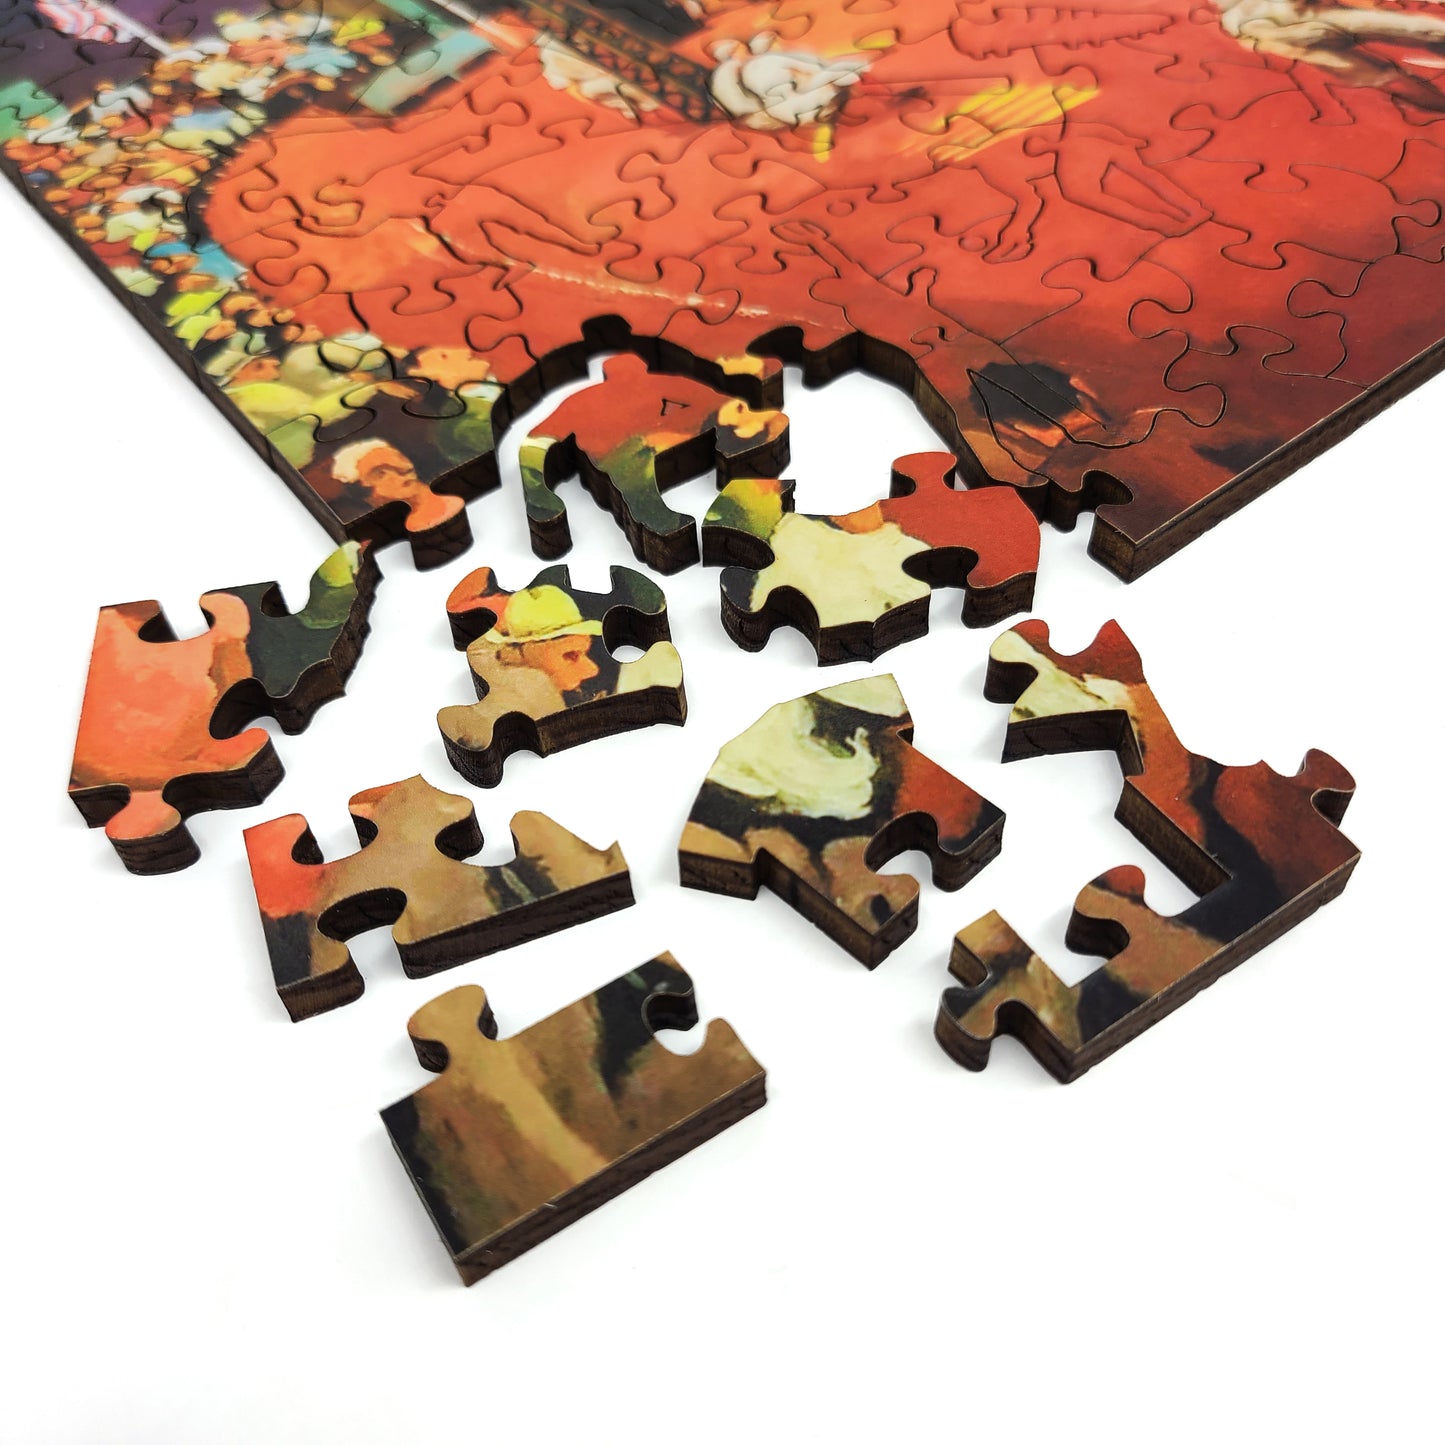 Wooden Jigsaw Puzzle for Adults with Uniquely Shaped Whimsical Pieces, made of thick 1/4 inch wood.